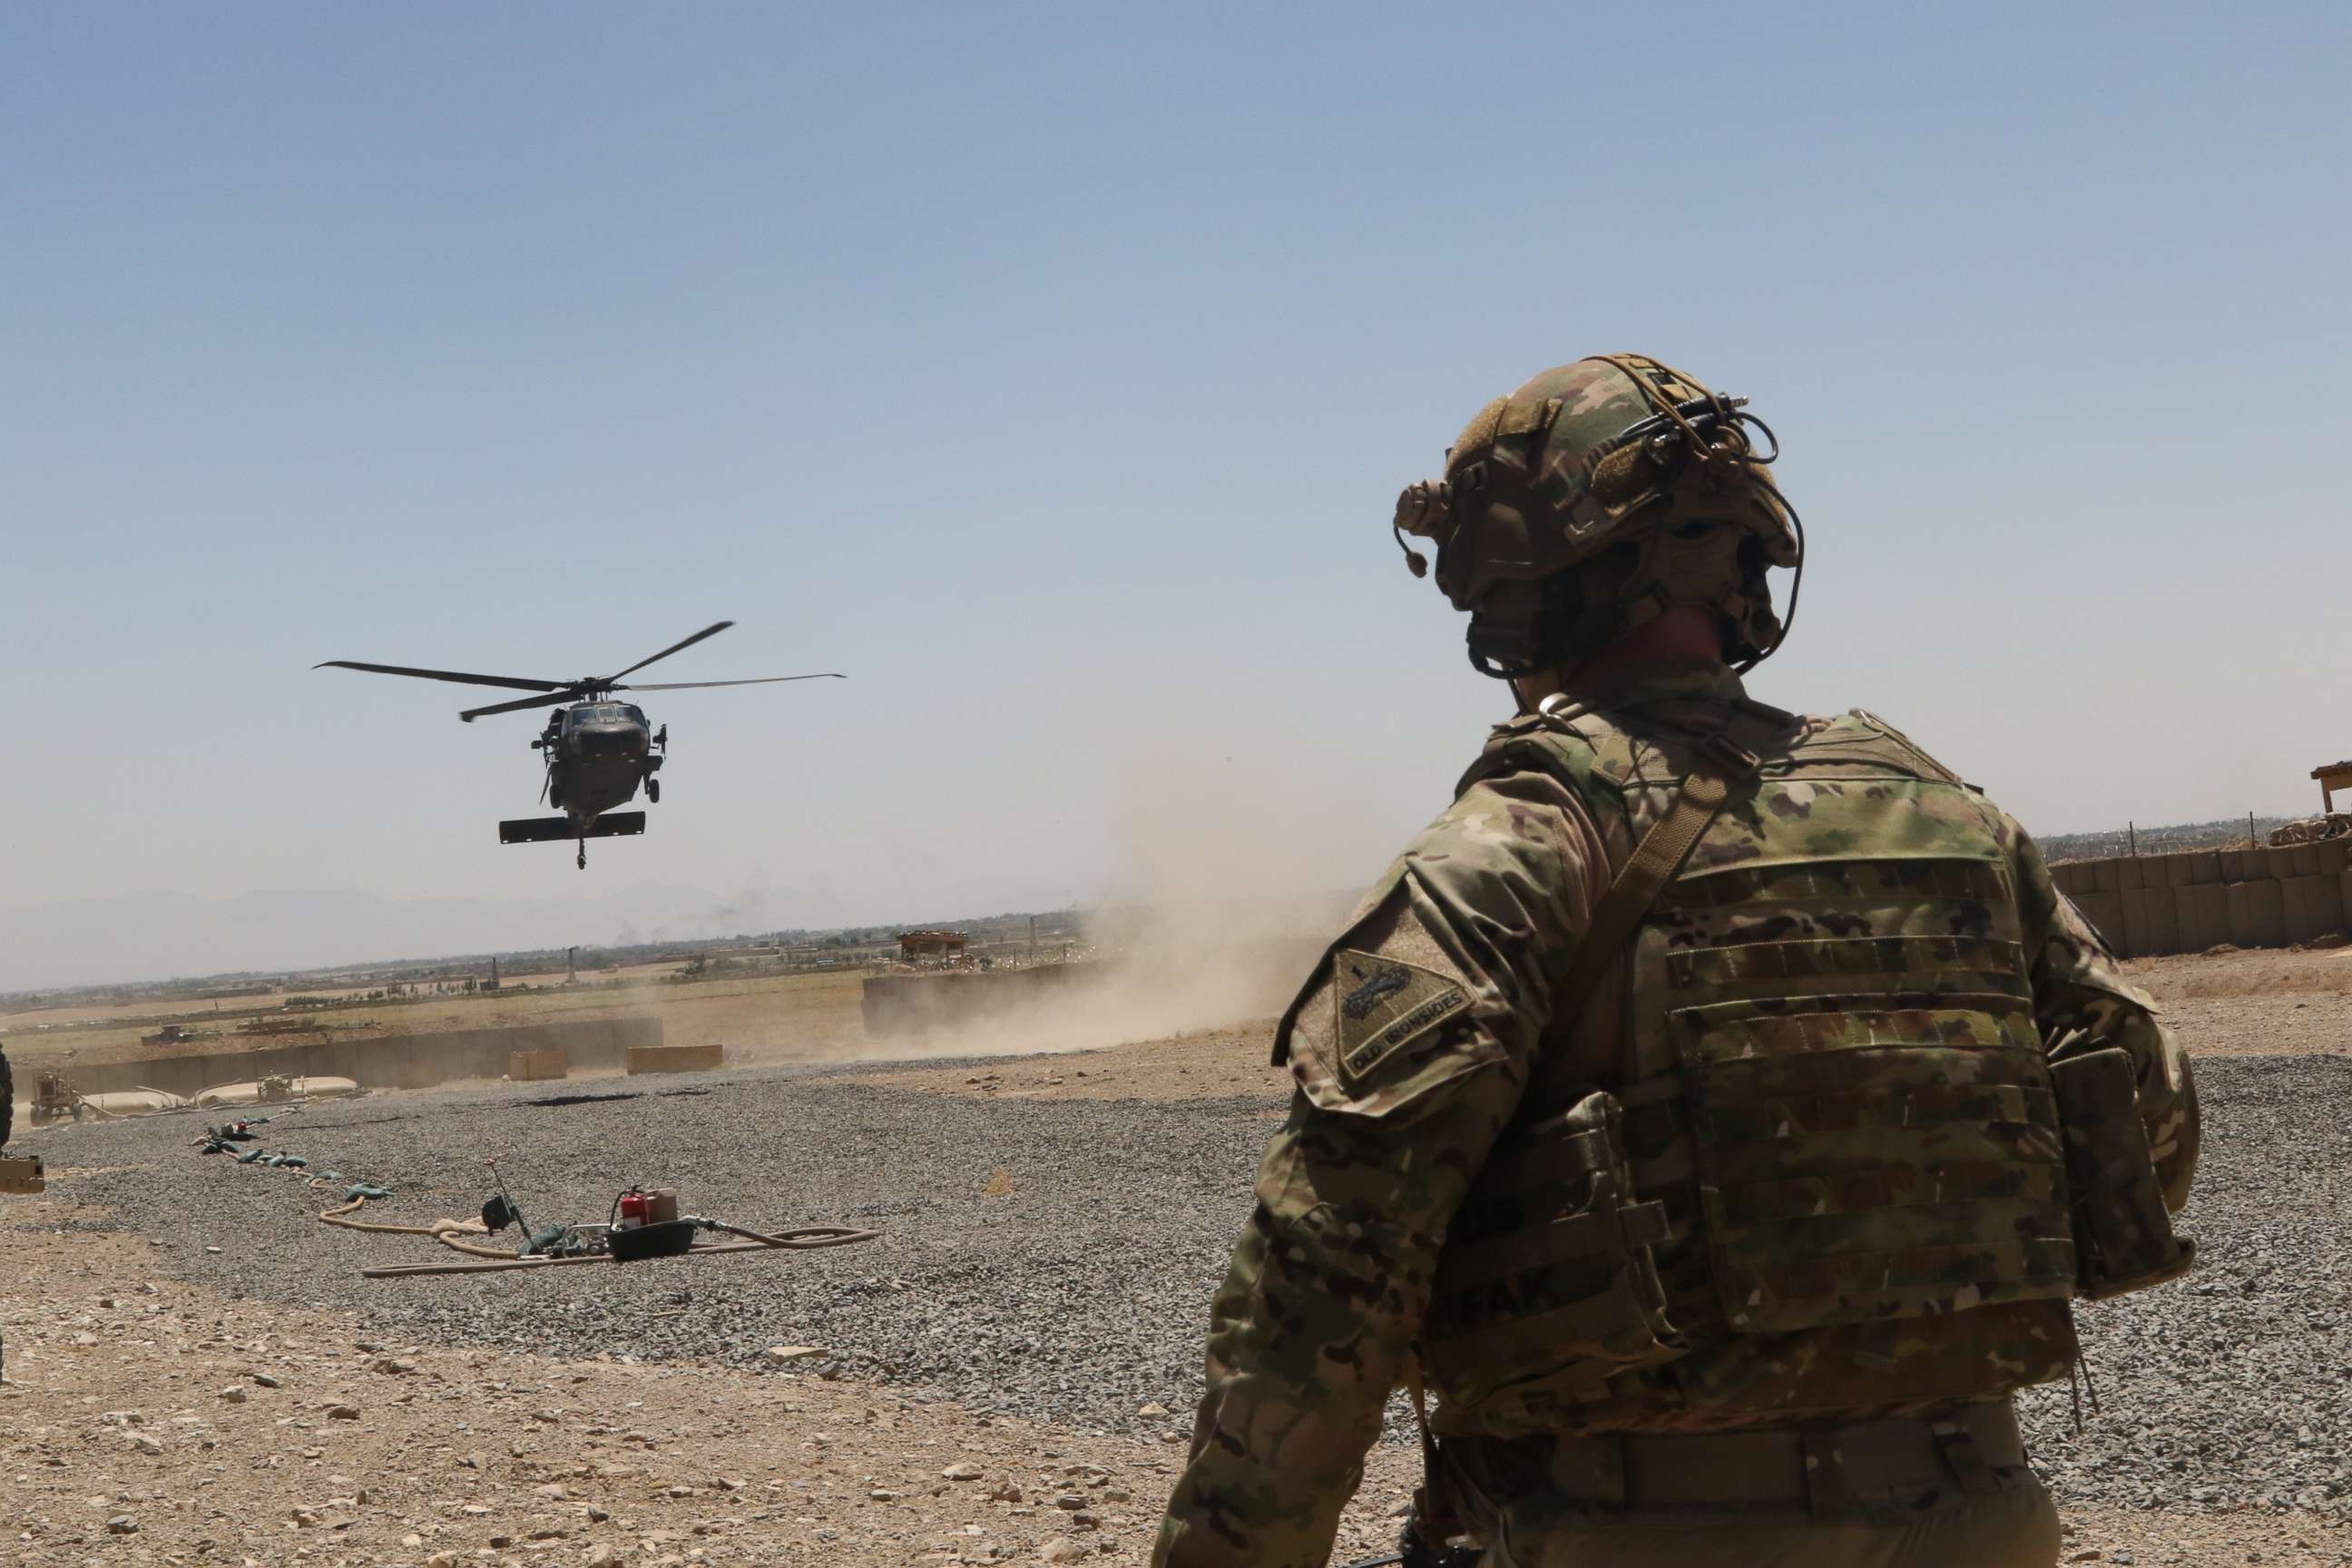 PHOTO: A Soldier watches as a UH-60 Blackhawk Helicopter prepares to land during an advise and assistance mission in southeastern Afghanistan, Aug. 4, 2019.